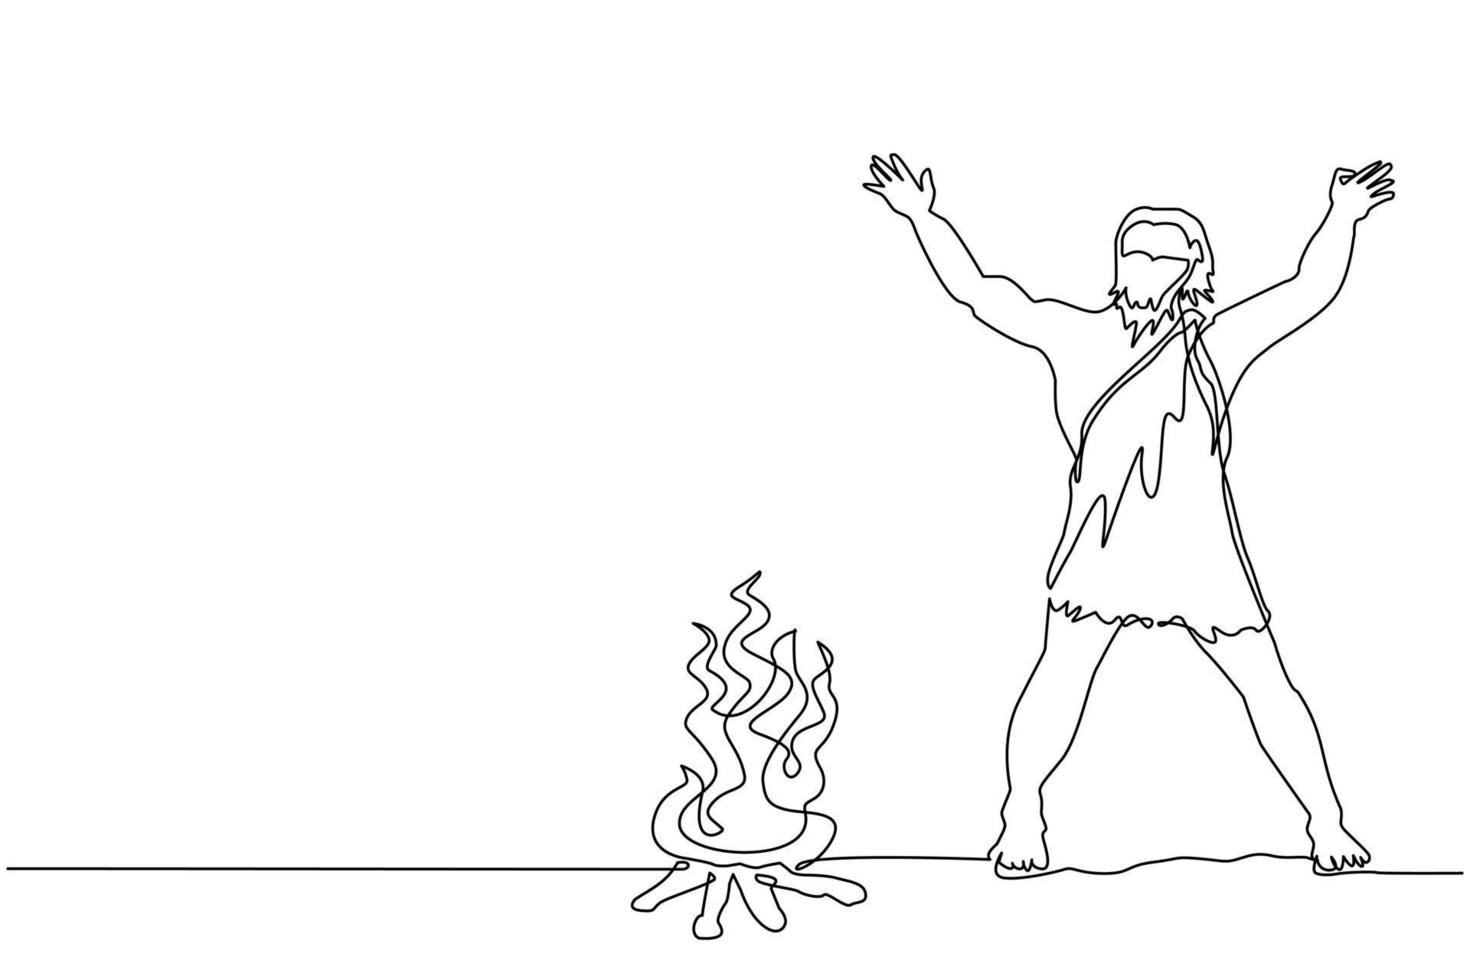 Single continuous line drawing prehistoric man standing around bonfire. Caveman stands and raised two of his hands around campfire. Warmth his body at night. One line draw design vector illustration